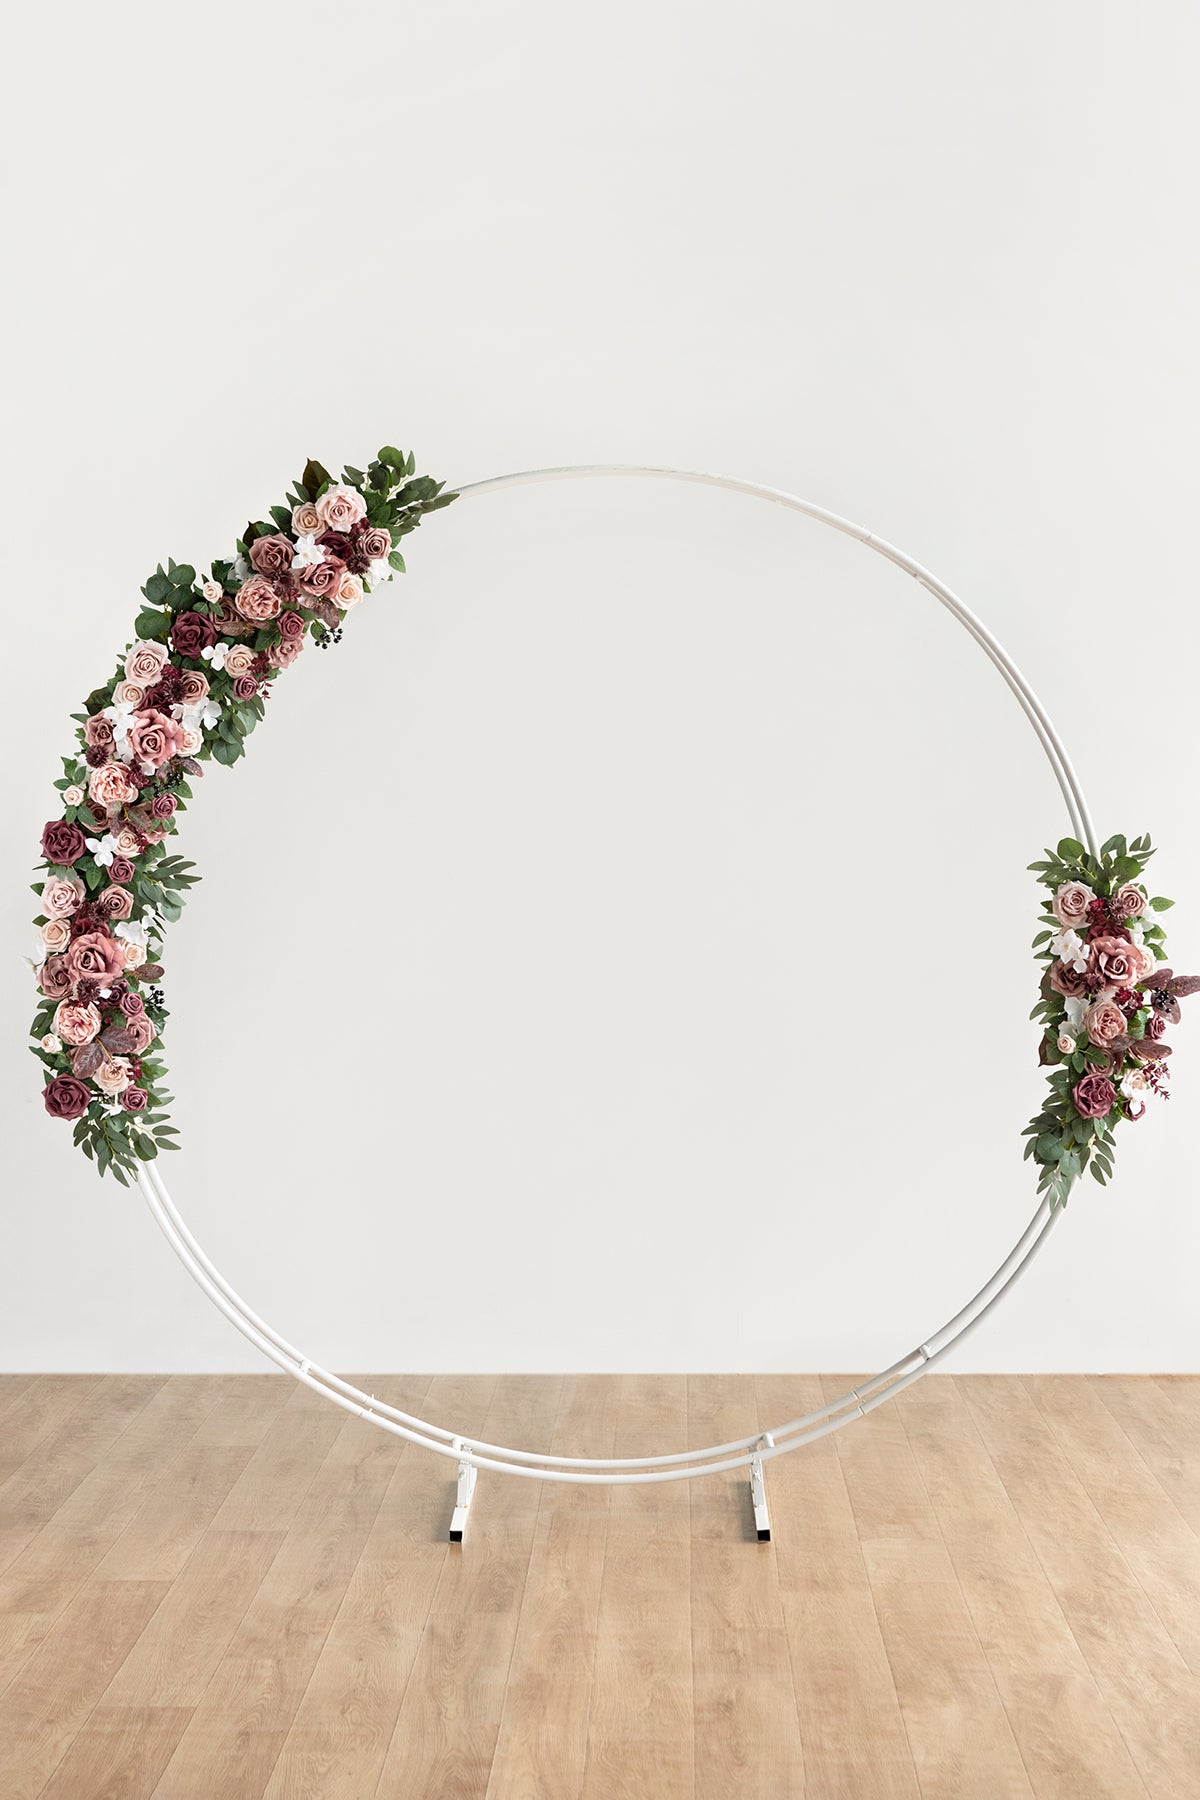 Flower Arrangements for Arch Decor in Dusty Rose & Mauve | Clearance